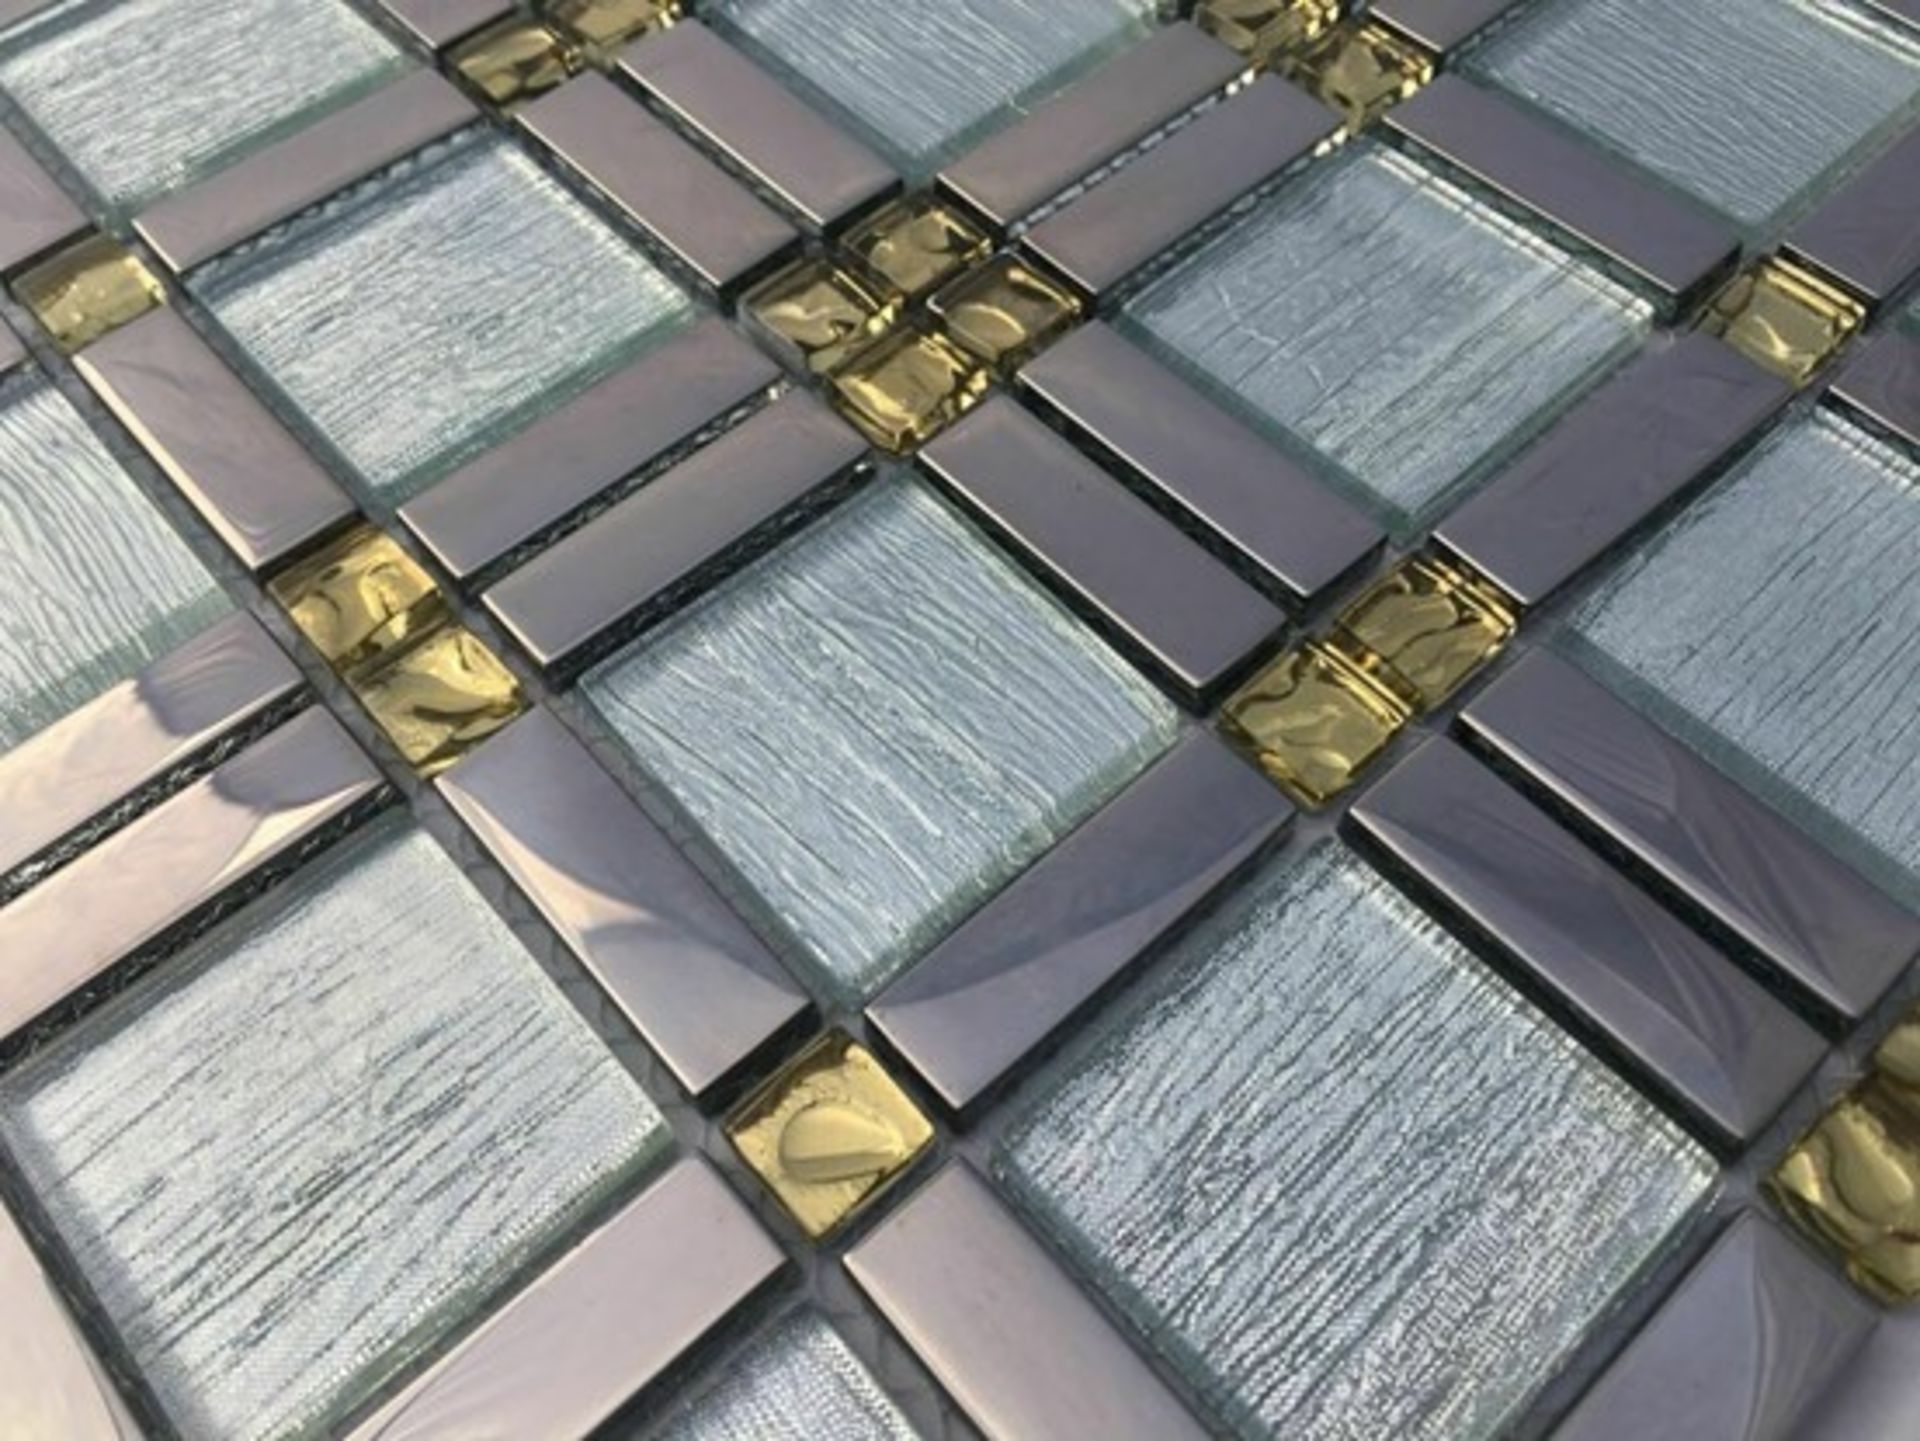 1 Pallet of 48 SQM (528 Sheets) Stock Clearance High Quality Glass Mosaic Tiles *PLUS VAT* - Image 2 of 3